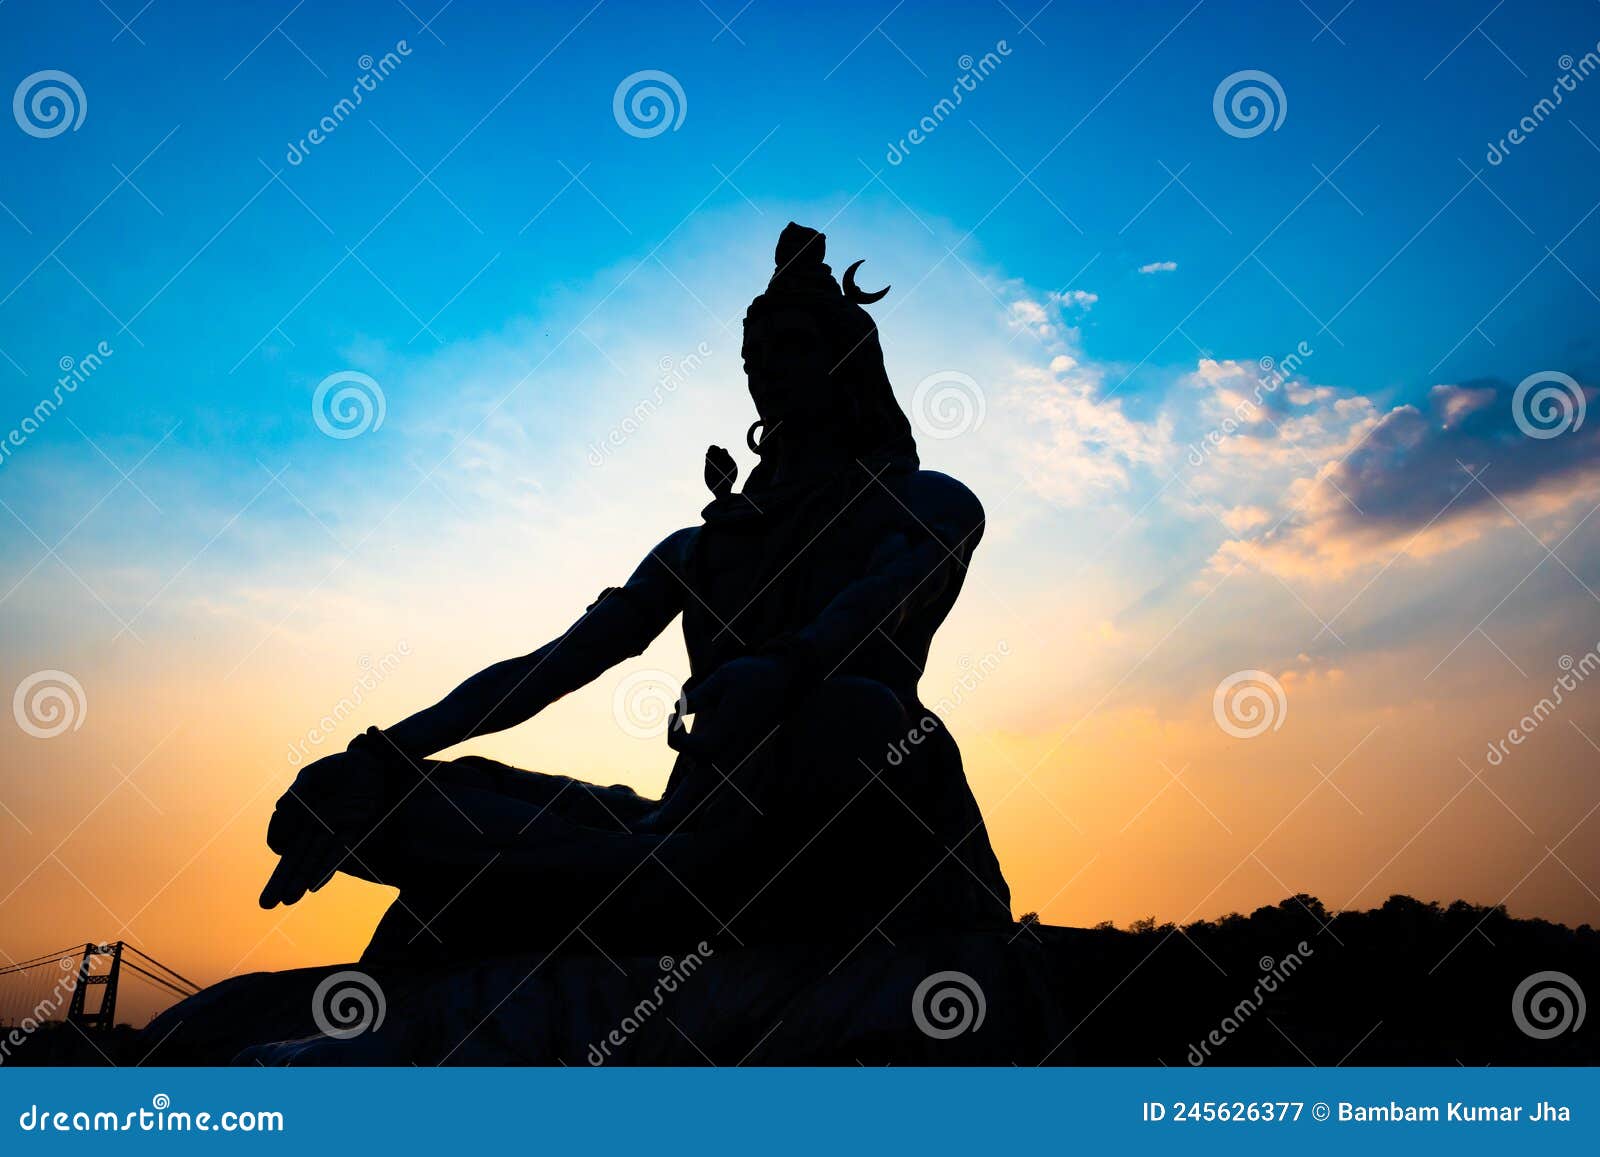 Back Lit Statue of Hindu God Lord Shiva in Meditation Posture with ...